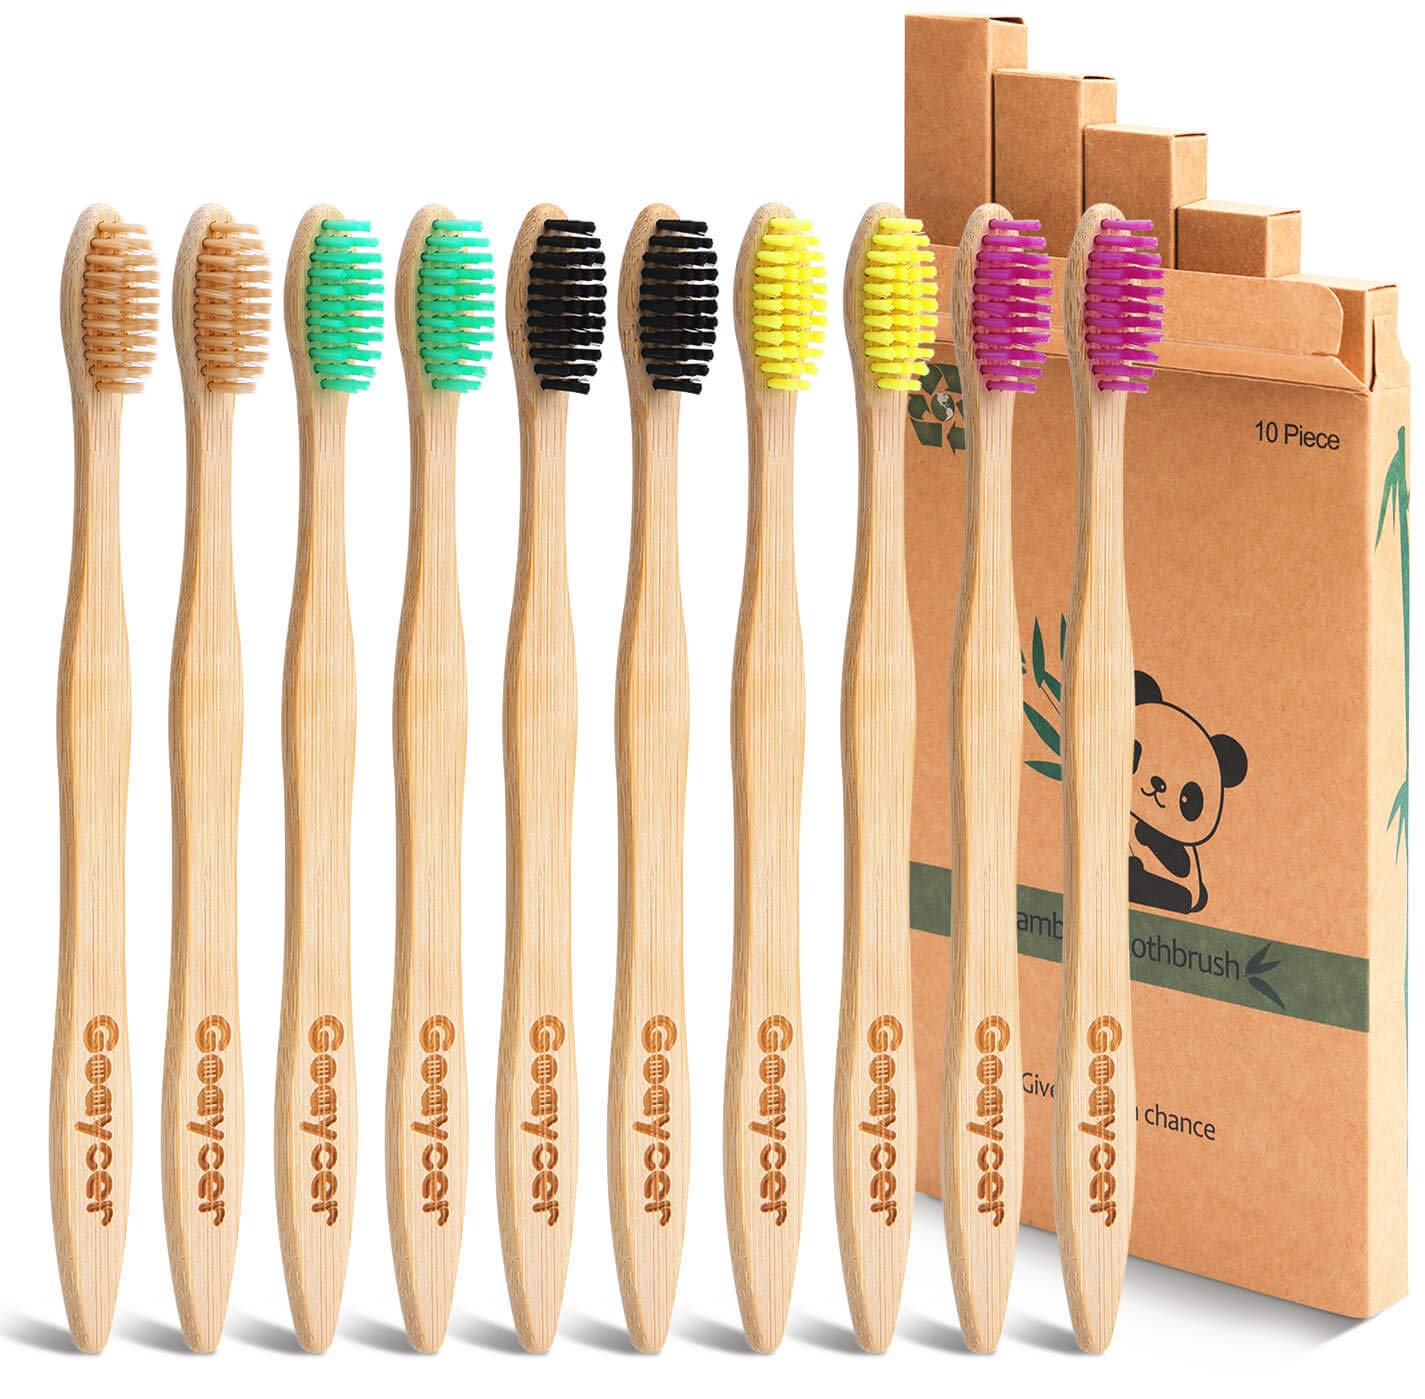 Goaycer Bamboo Toothbrush Review